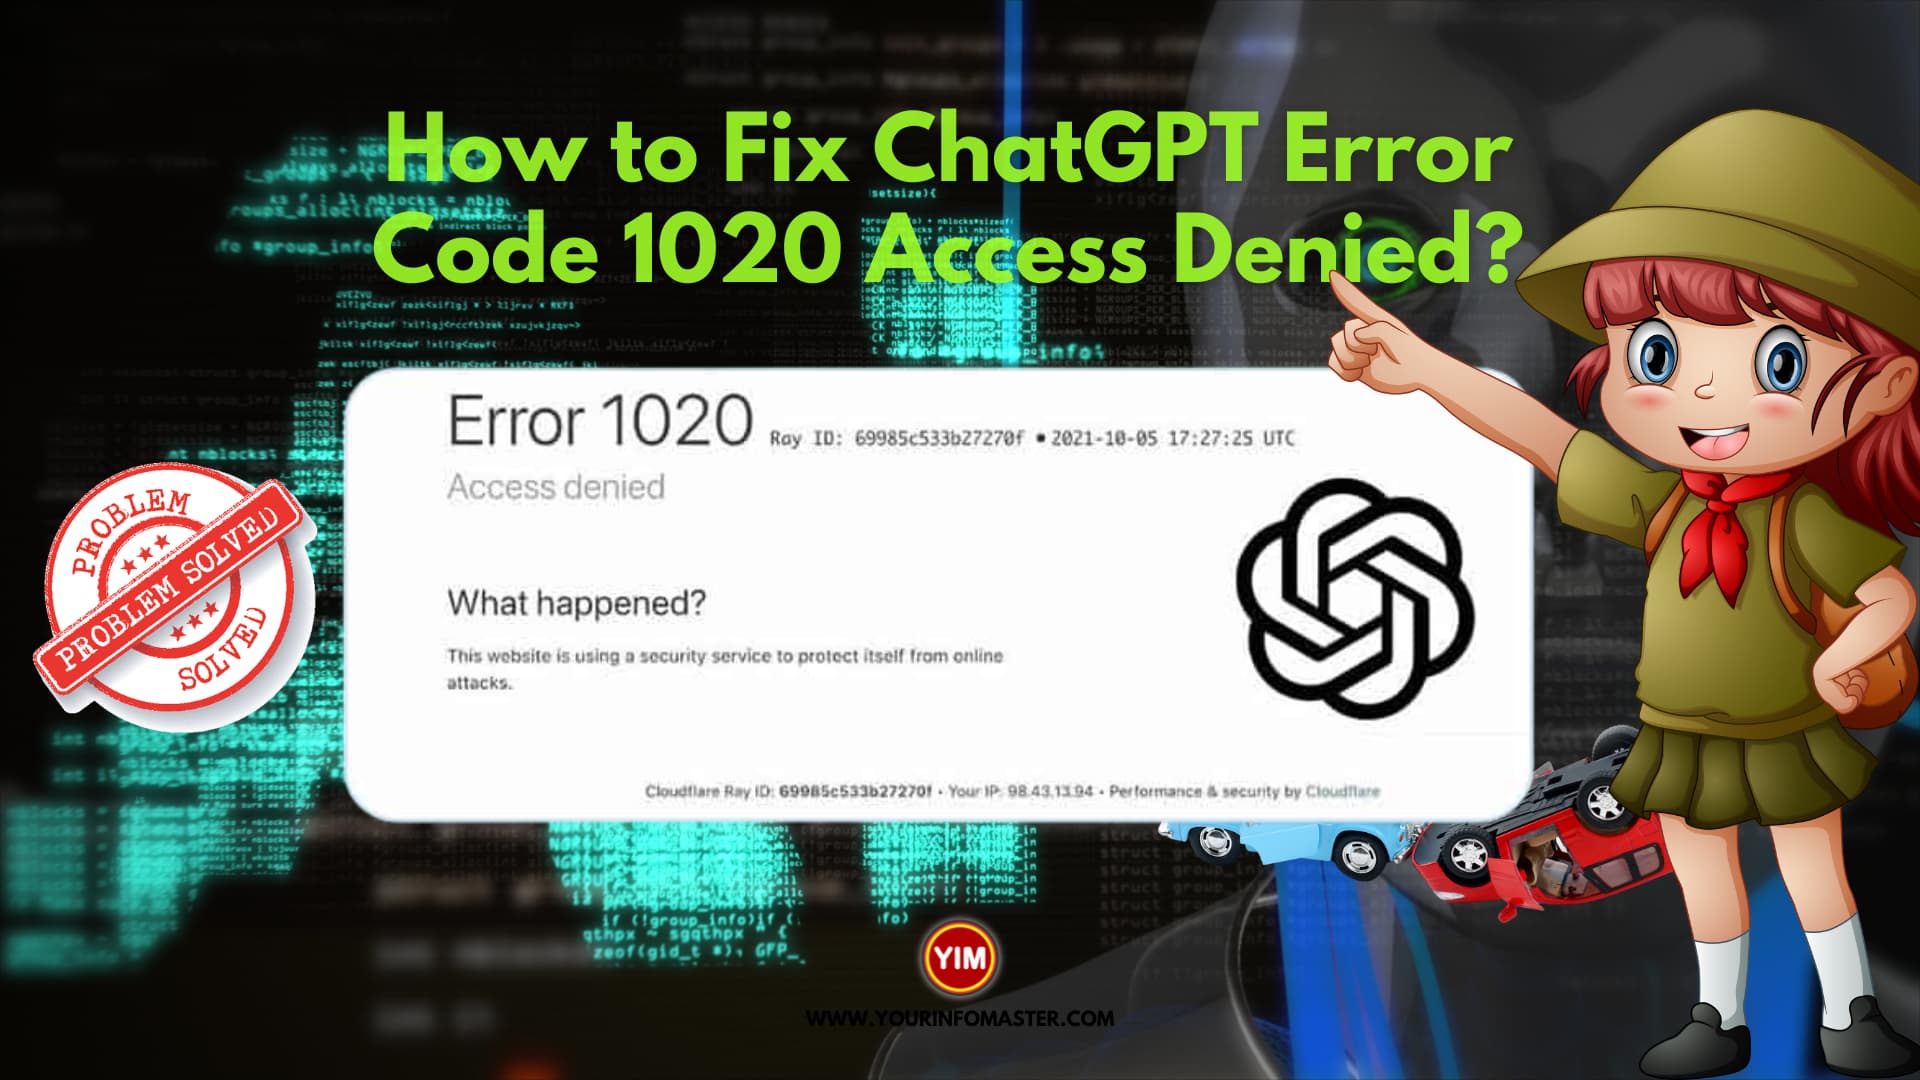 How to Fix ChatGPT Error Code 1020 Access Denied